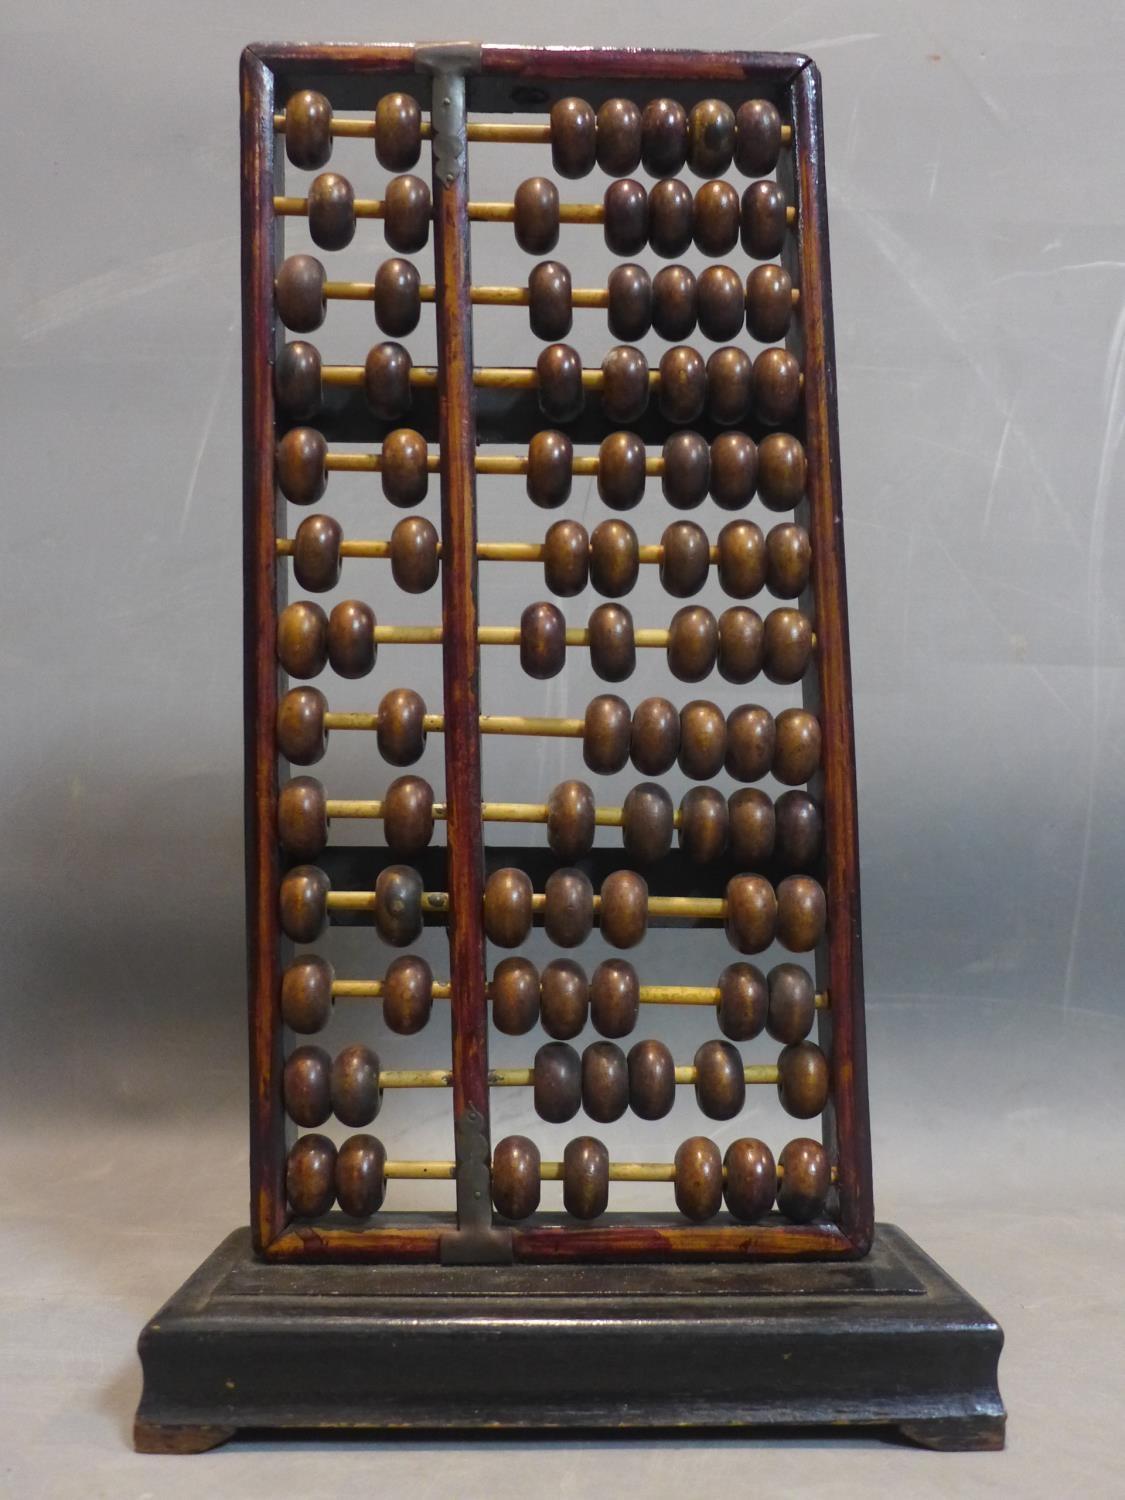 Early 20th century Chinese abacus, steel, bamboo and, wood, H.42 x W.24 x D.13 cm This is an